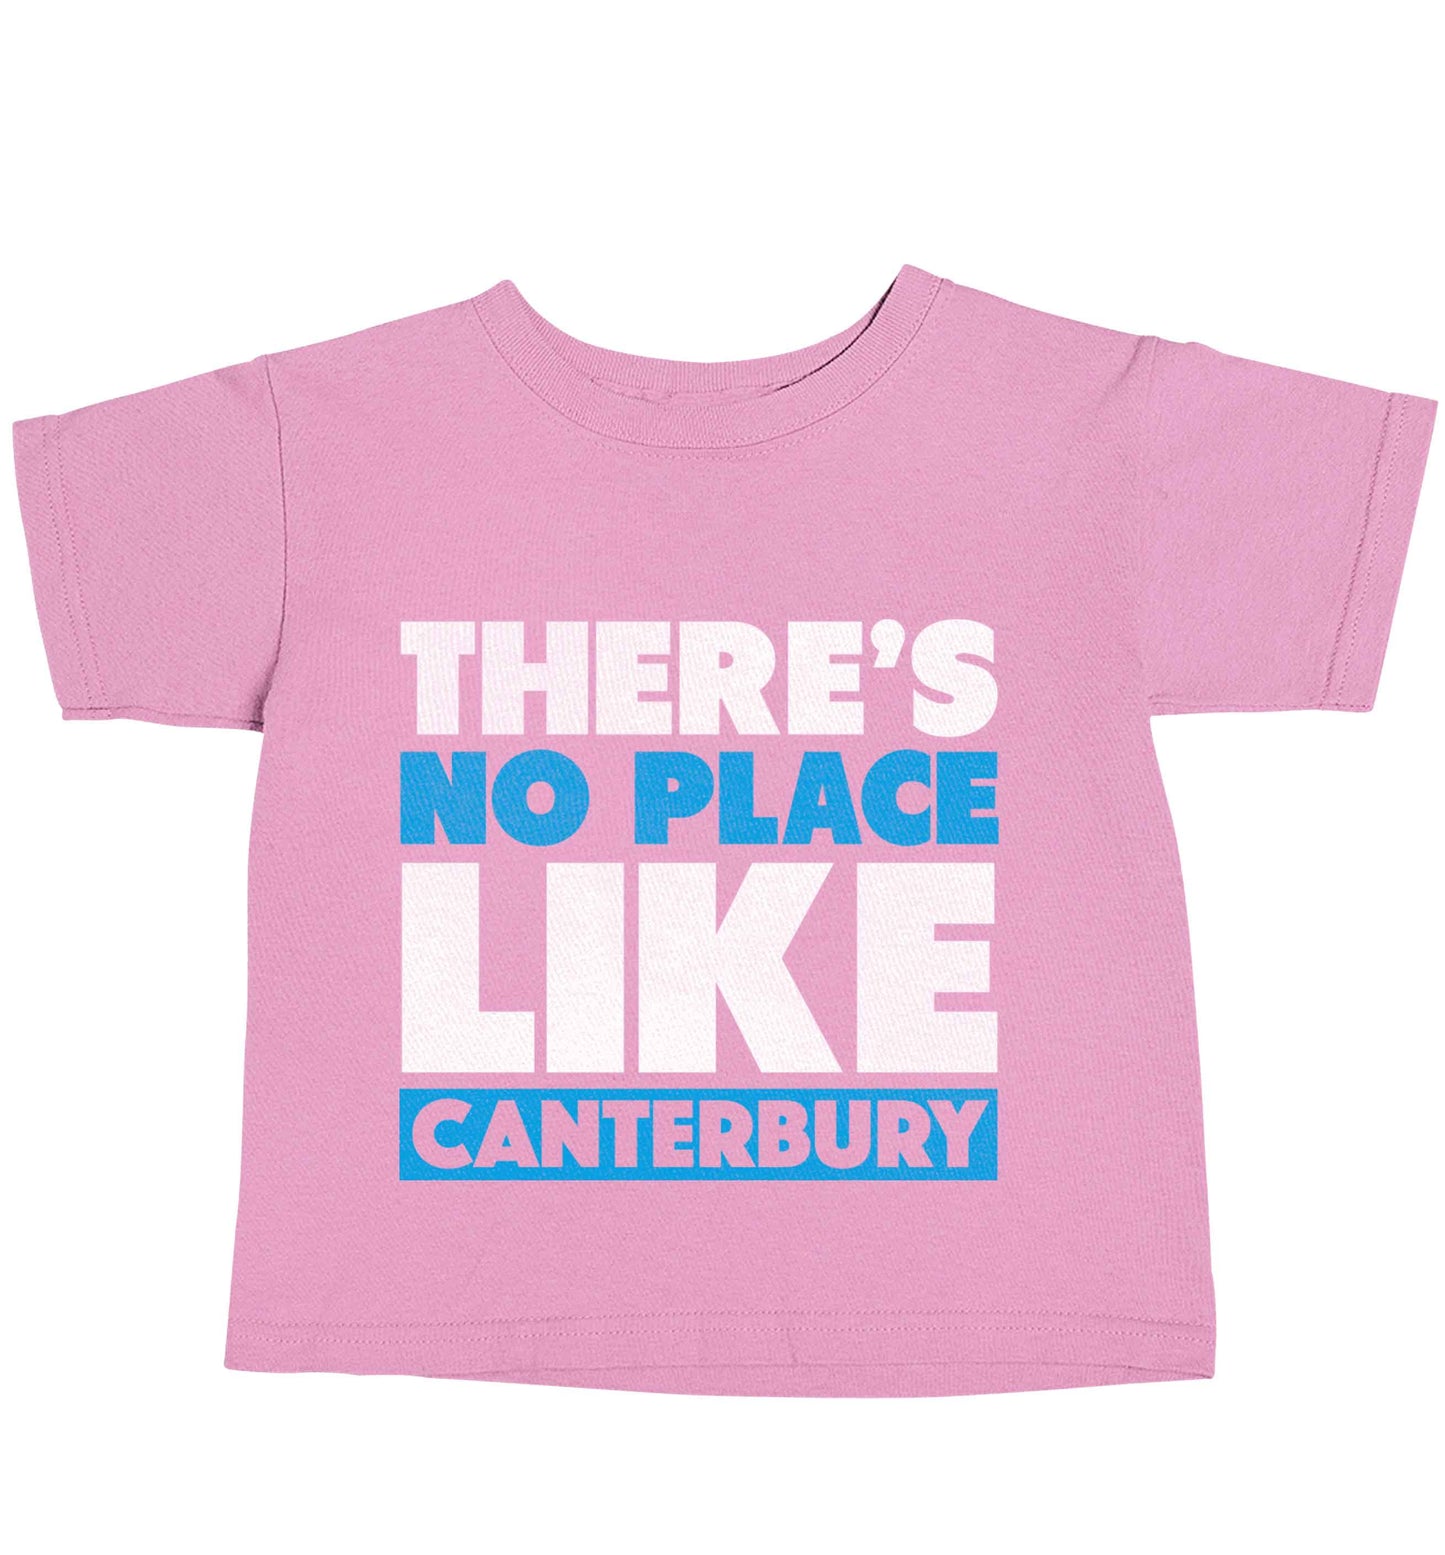 There's no place like Canterbury light pink baby toddler Tshirt 2 Years